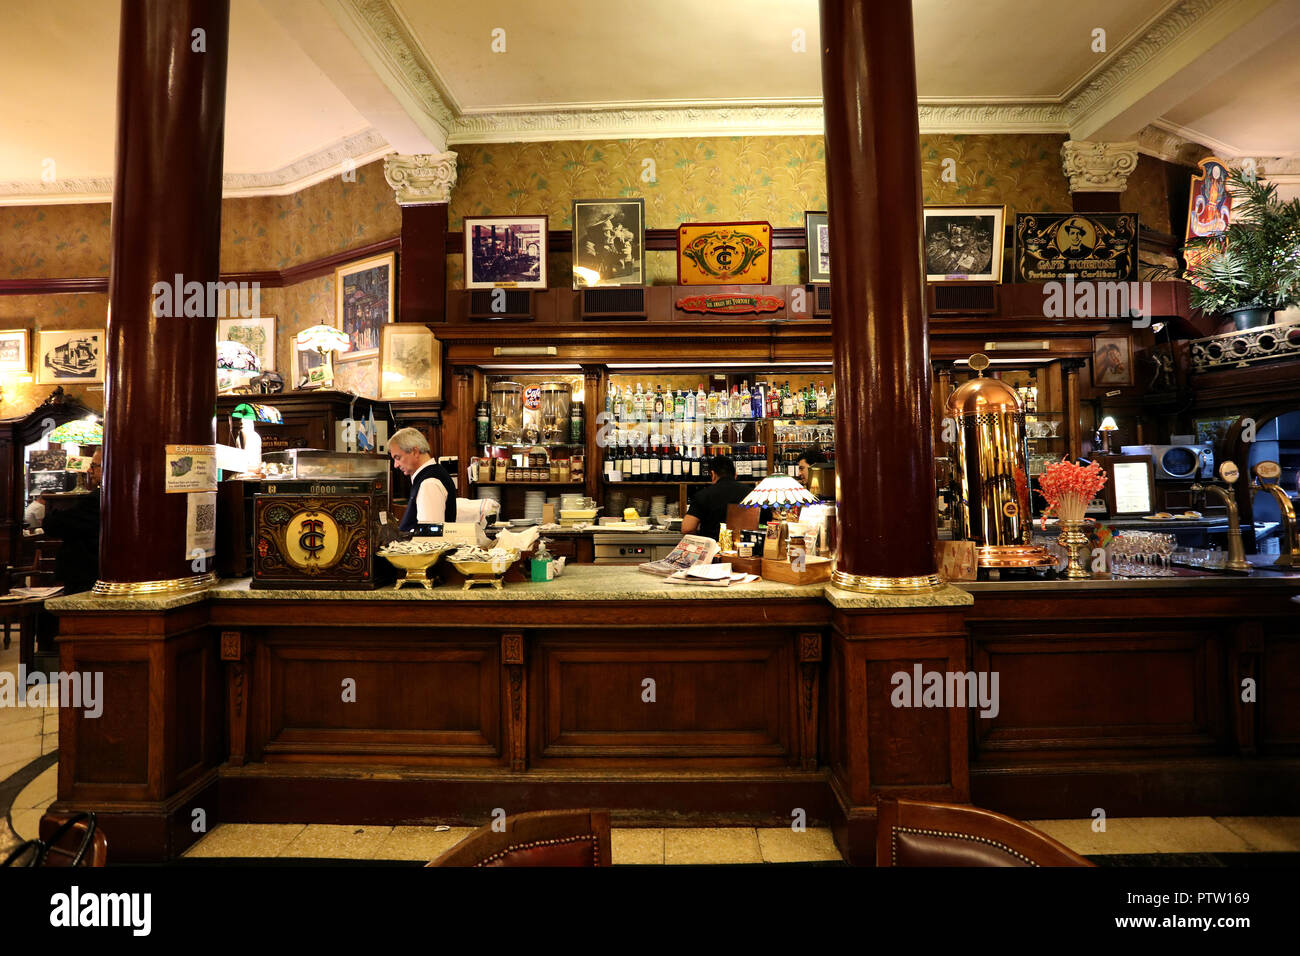 Buenos Aires, Argentina - October 10, 2018: Cafe Tortoni famous bar in Avenida de Mayo in Buenos Aires, Argentina Stock Photo